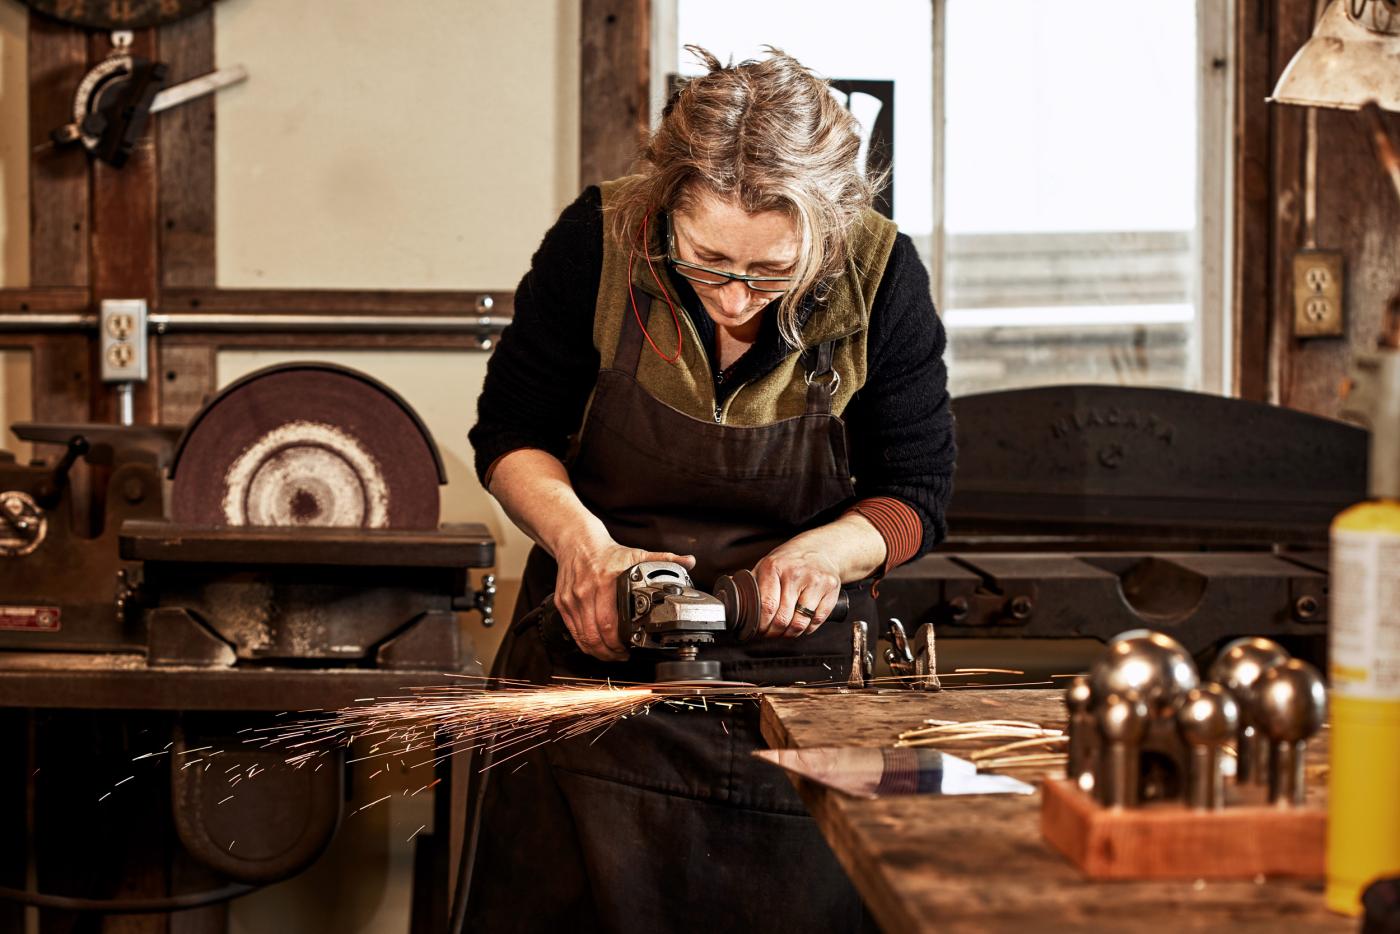 Maine Crafts Association image of Erica Moody, metal smith, making sparks fly in her studio.